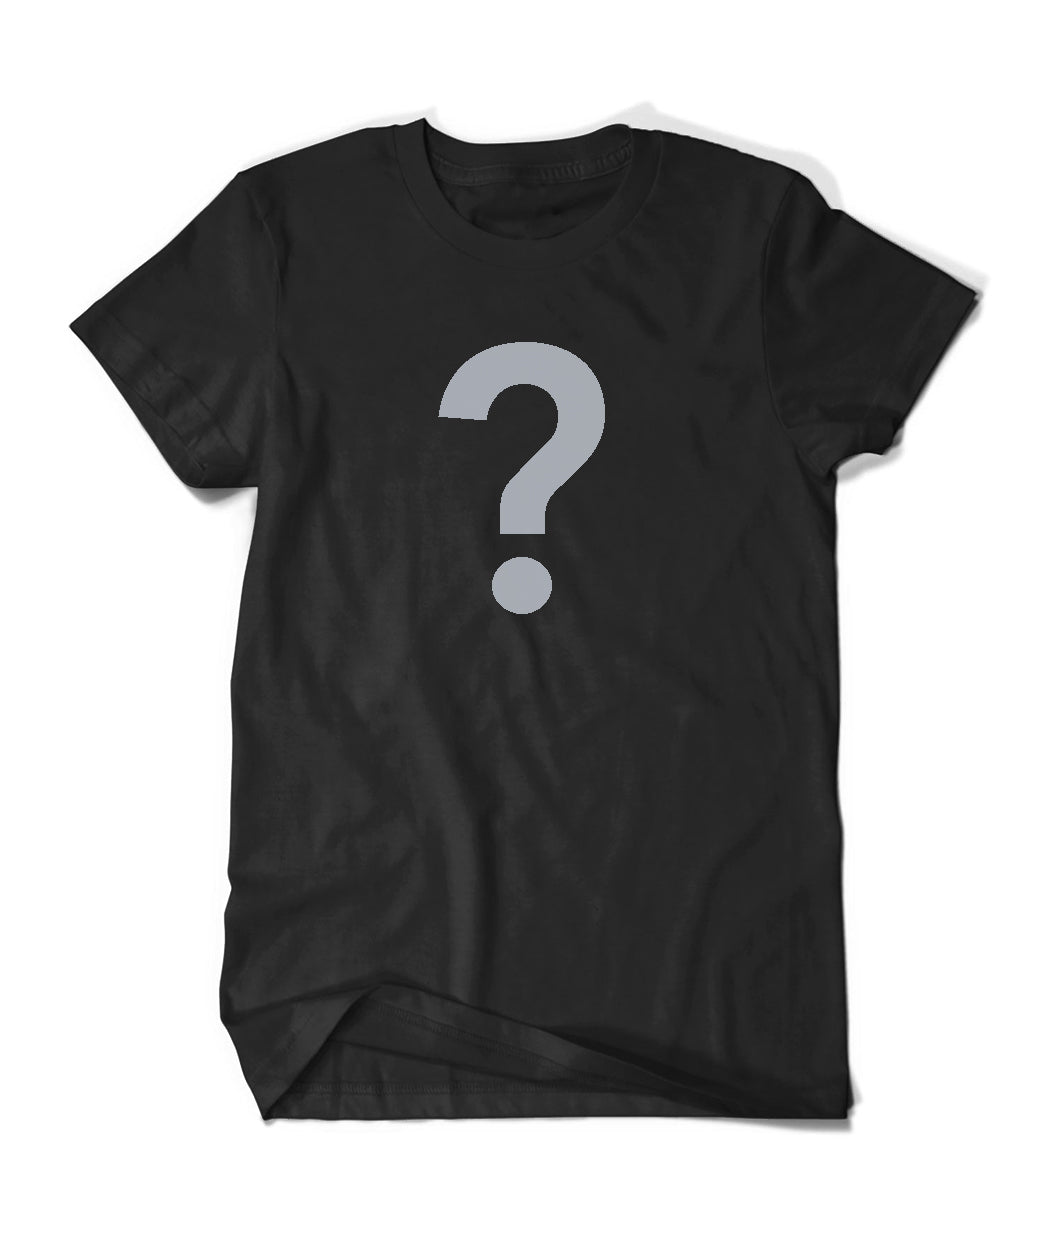 Black shirt with a gray question mark in the center - from Tesladyne